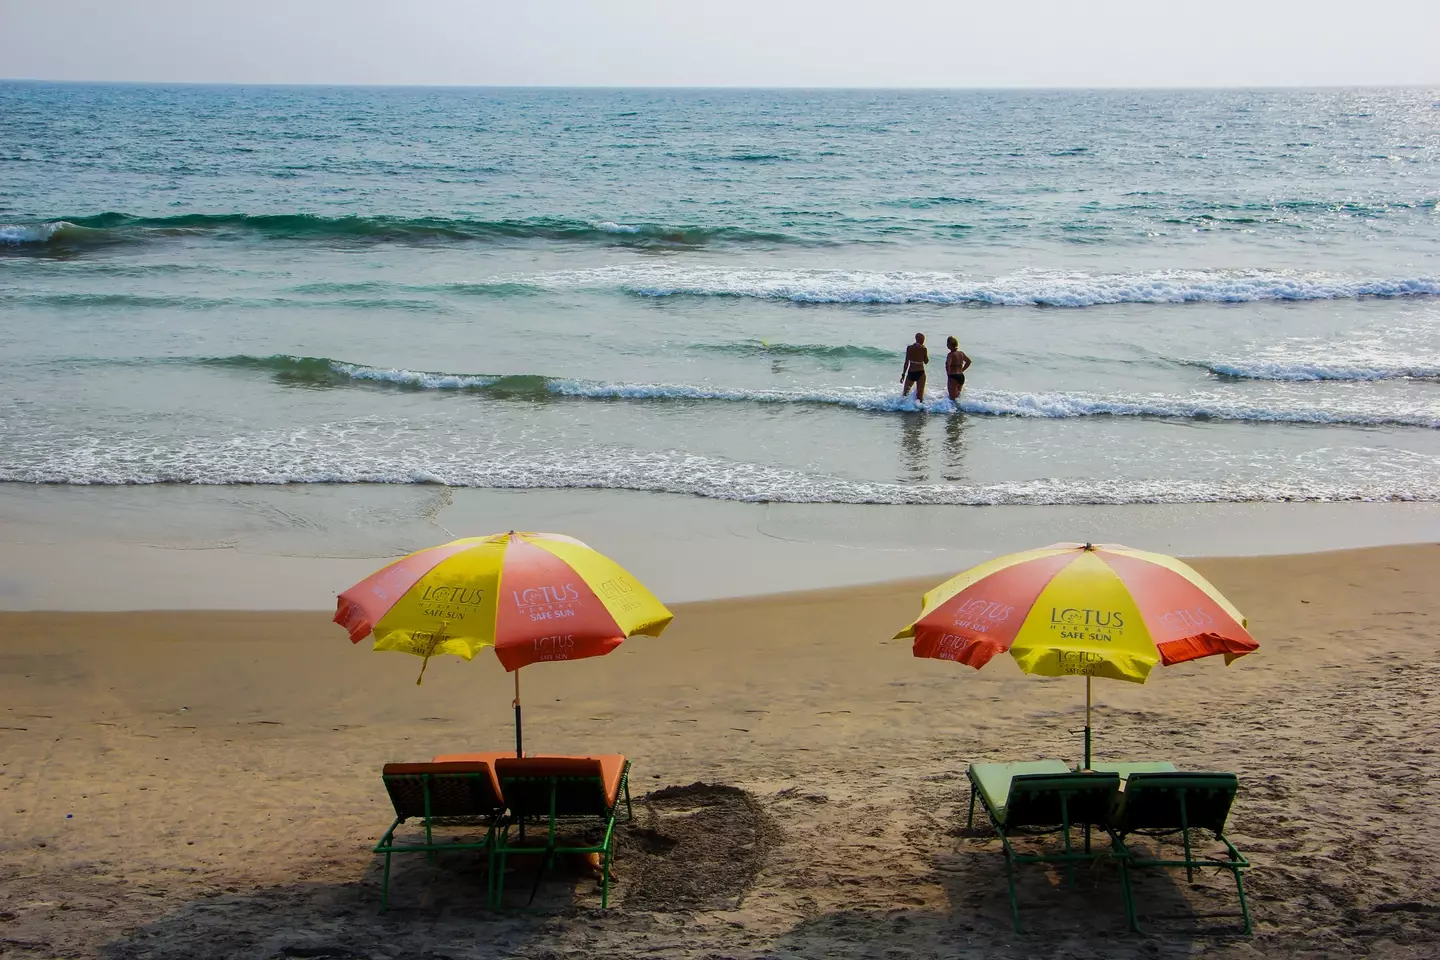 A woman in South Carolina was fatally injured when she was impaled by a beach umbrella.